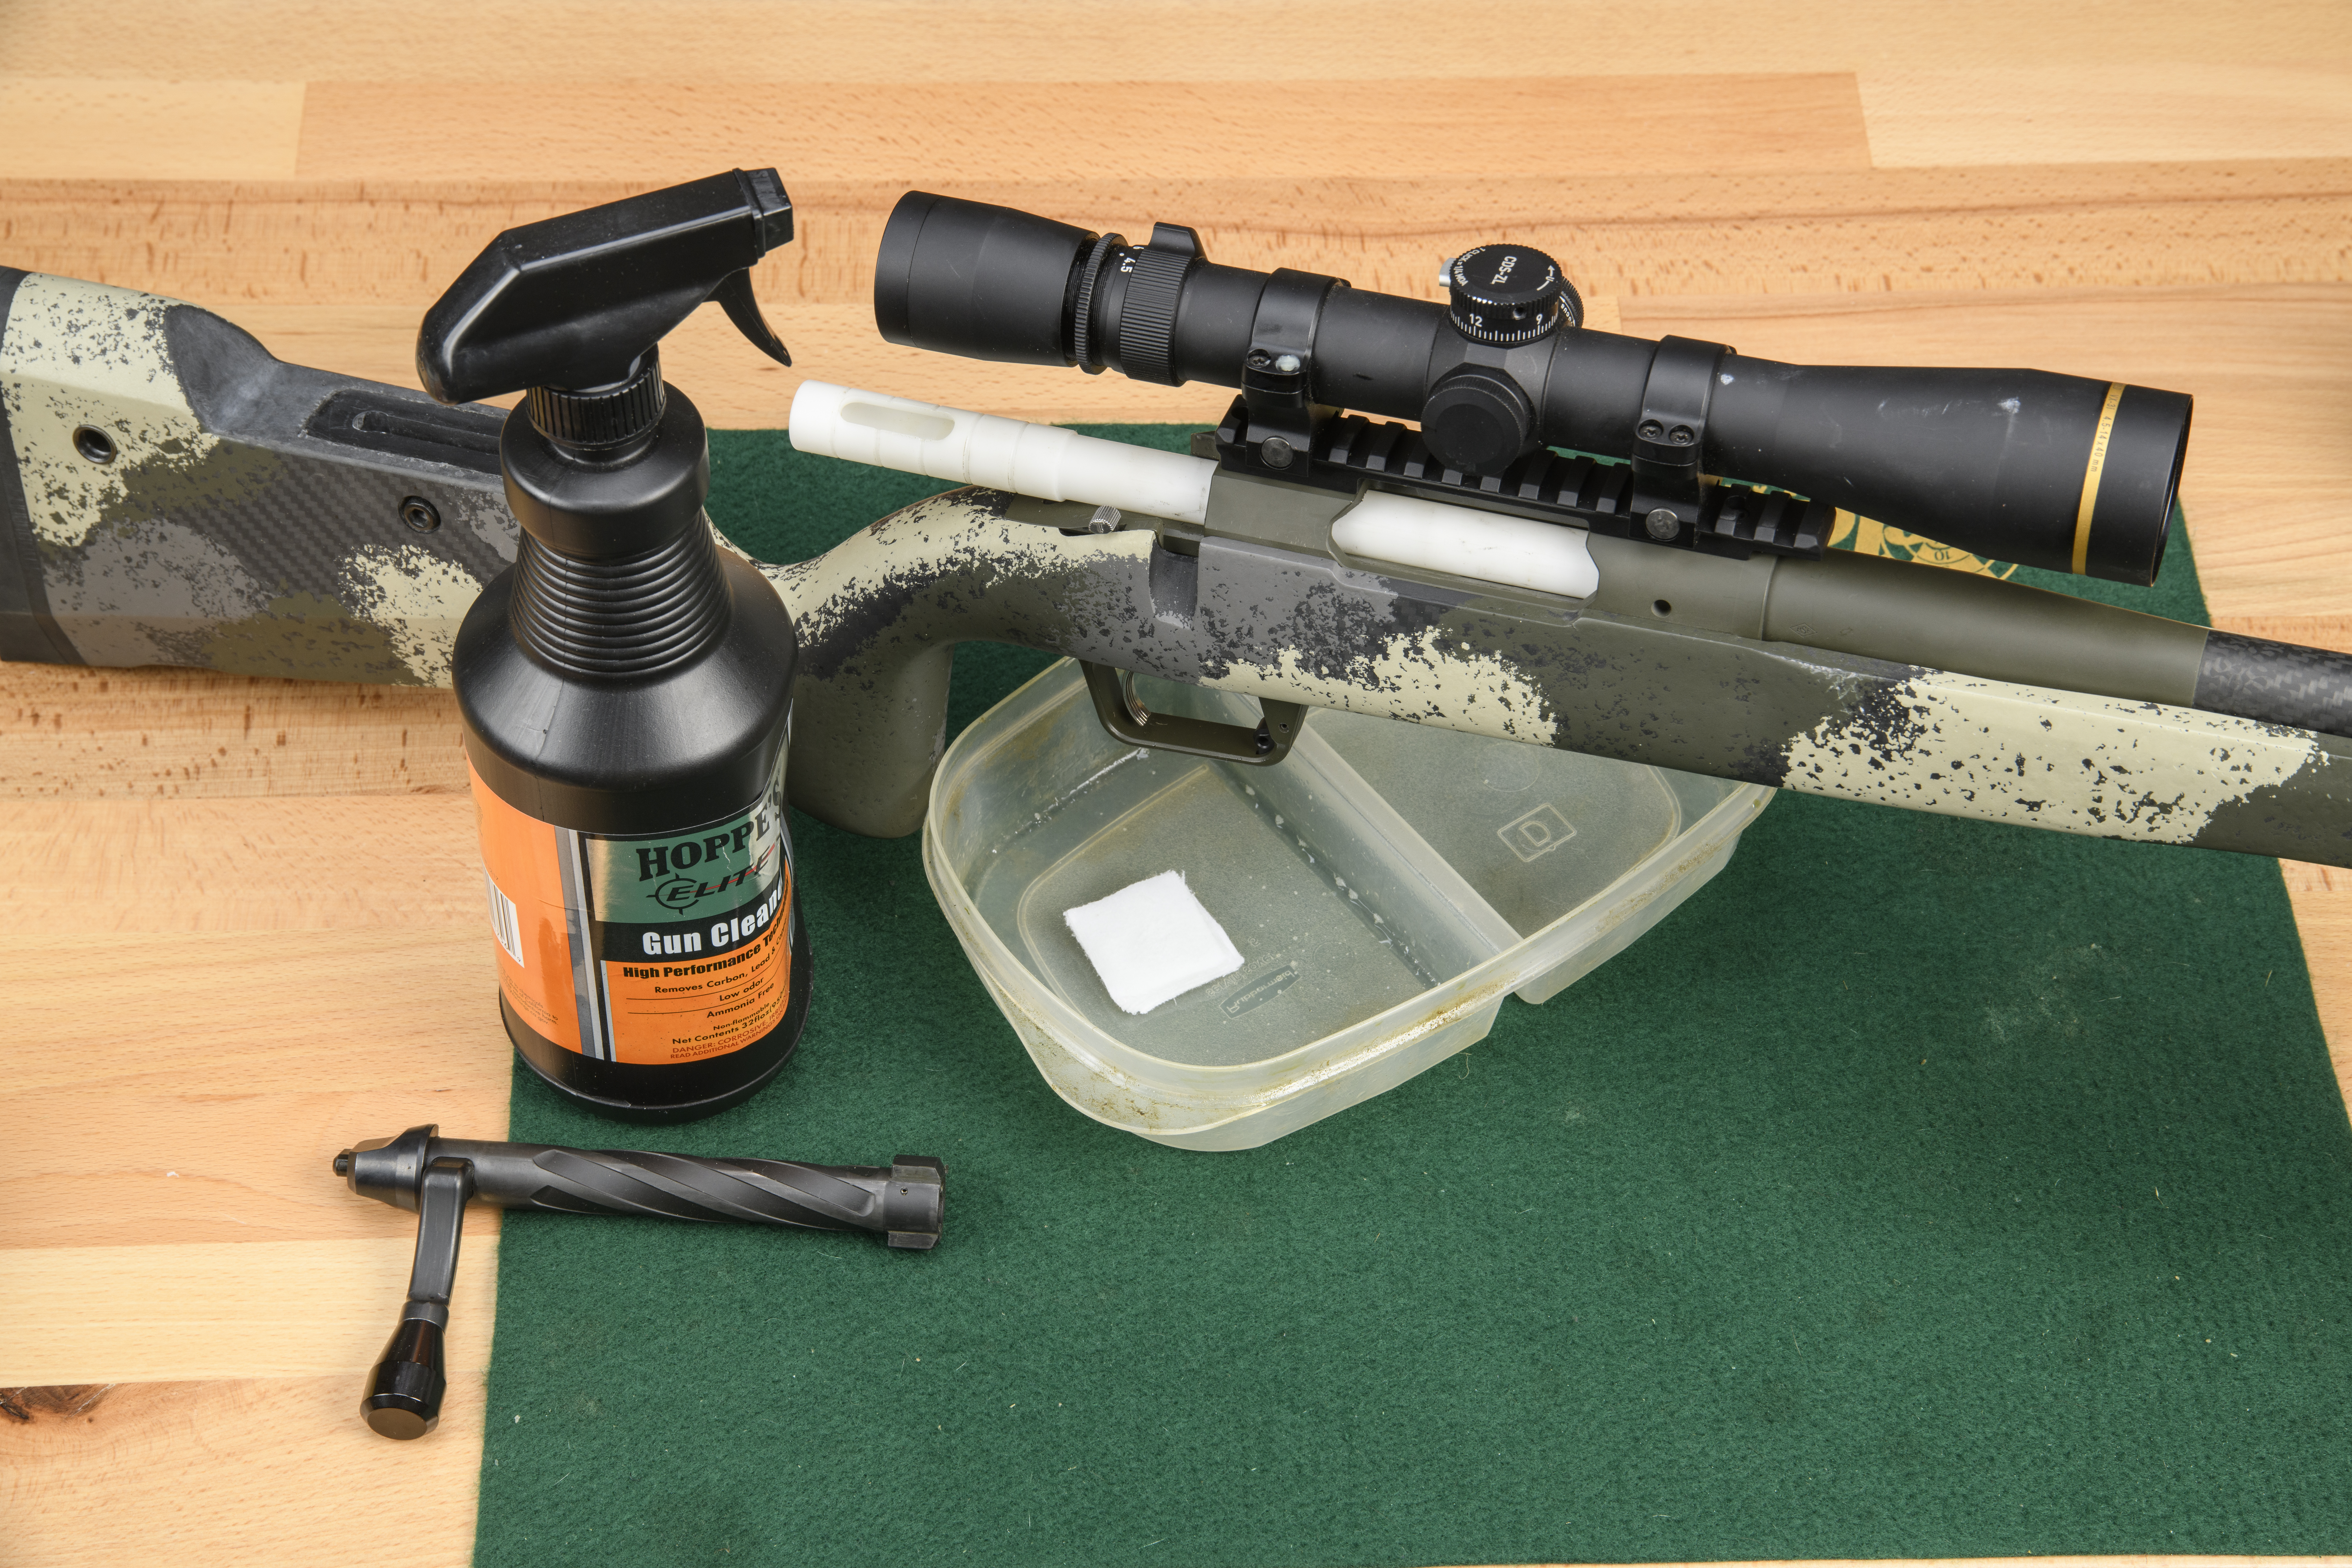 All about What Are The Best Ways To Clean Your 22 Semi-automatic Rifle?